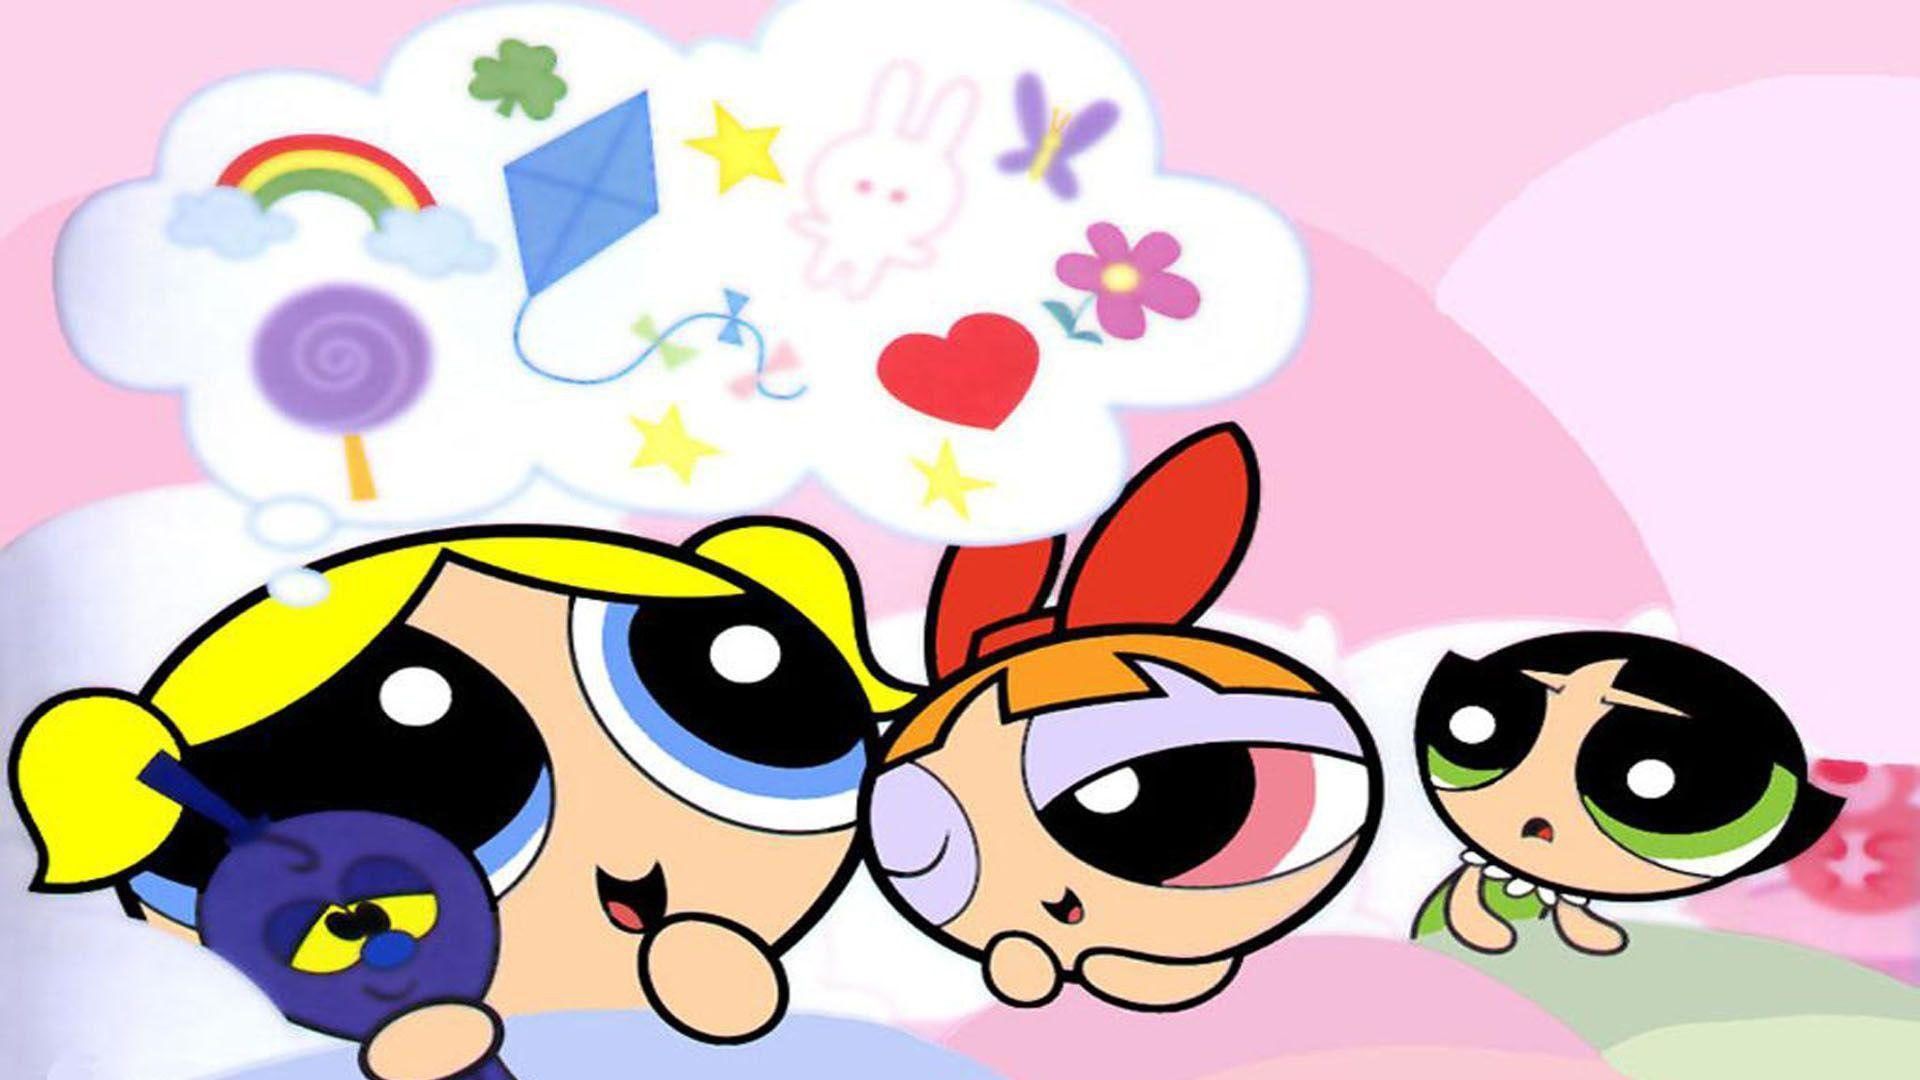 The Powerpuff Girls Blossom, Bubbles and Buttercup In Dreamy Background HD Anime Wallpaper